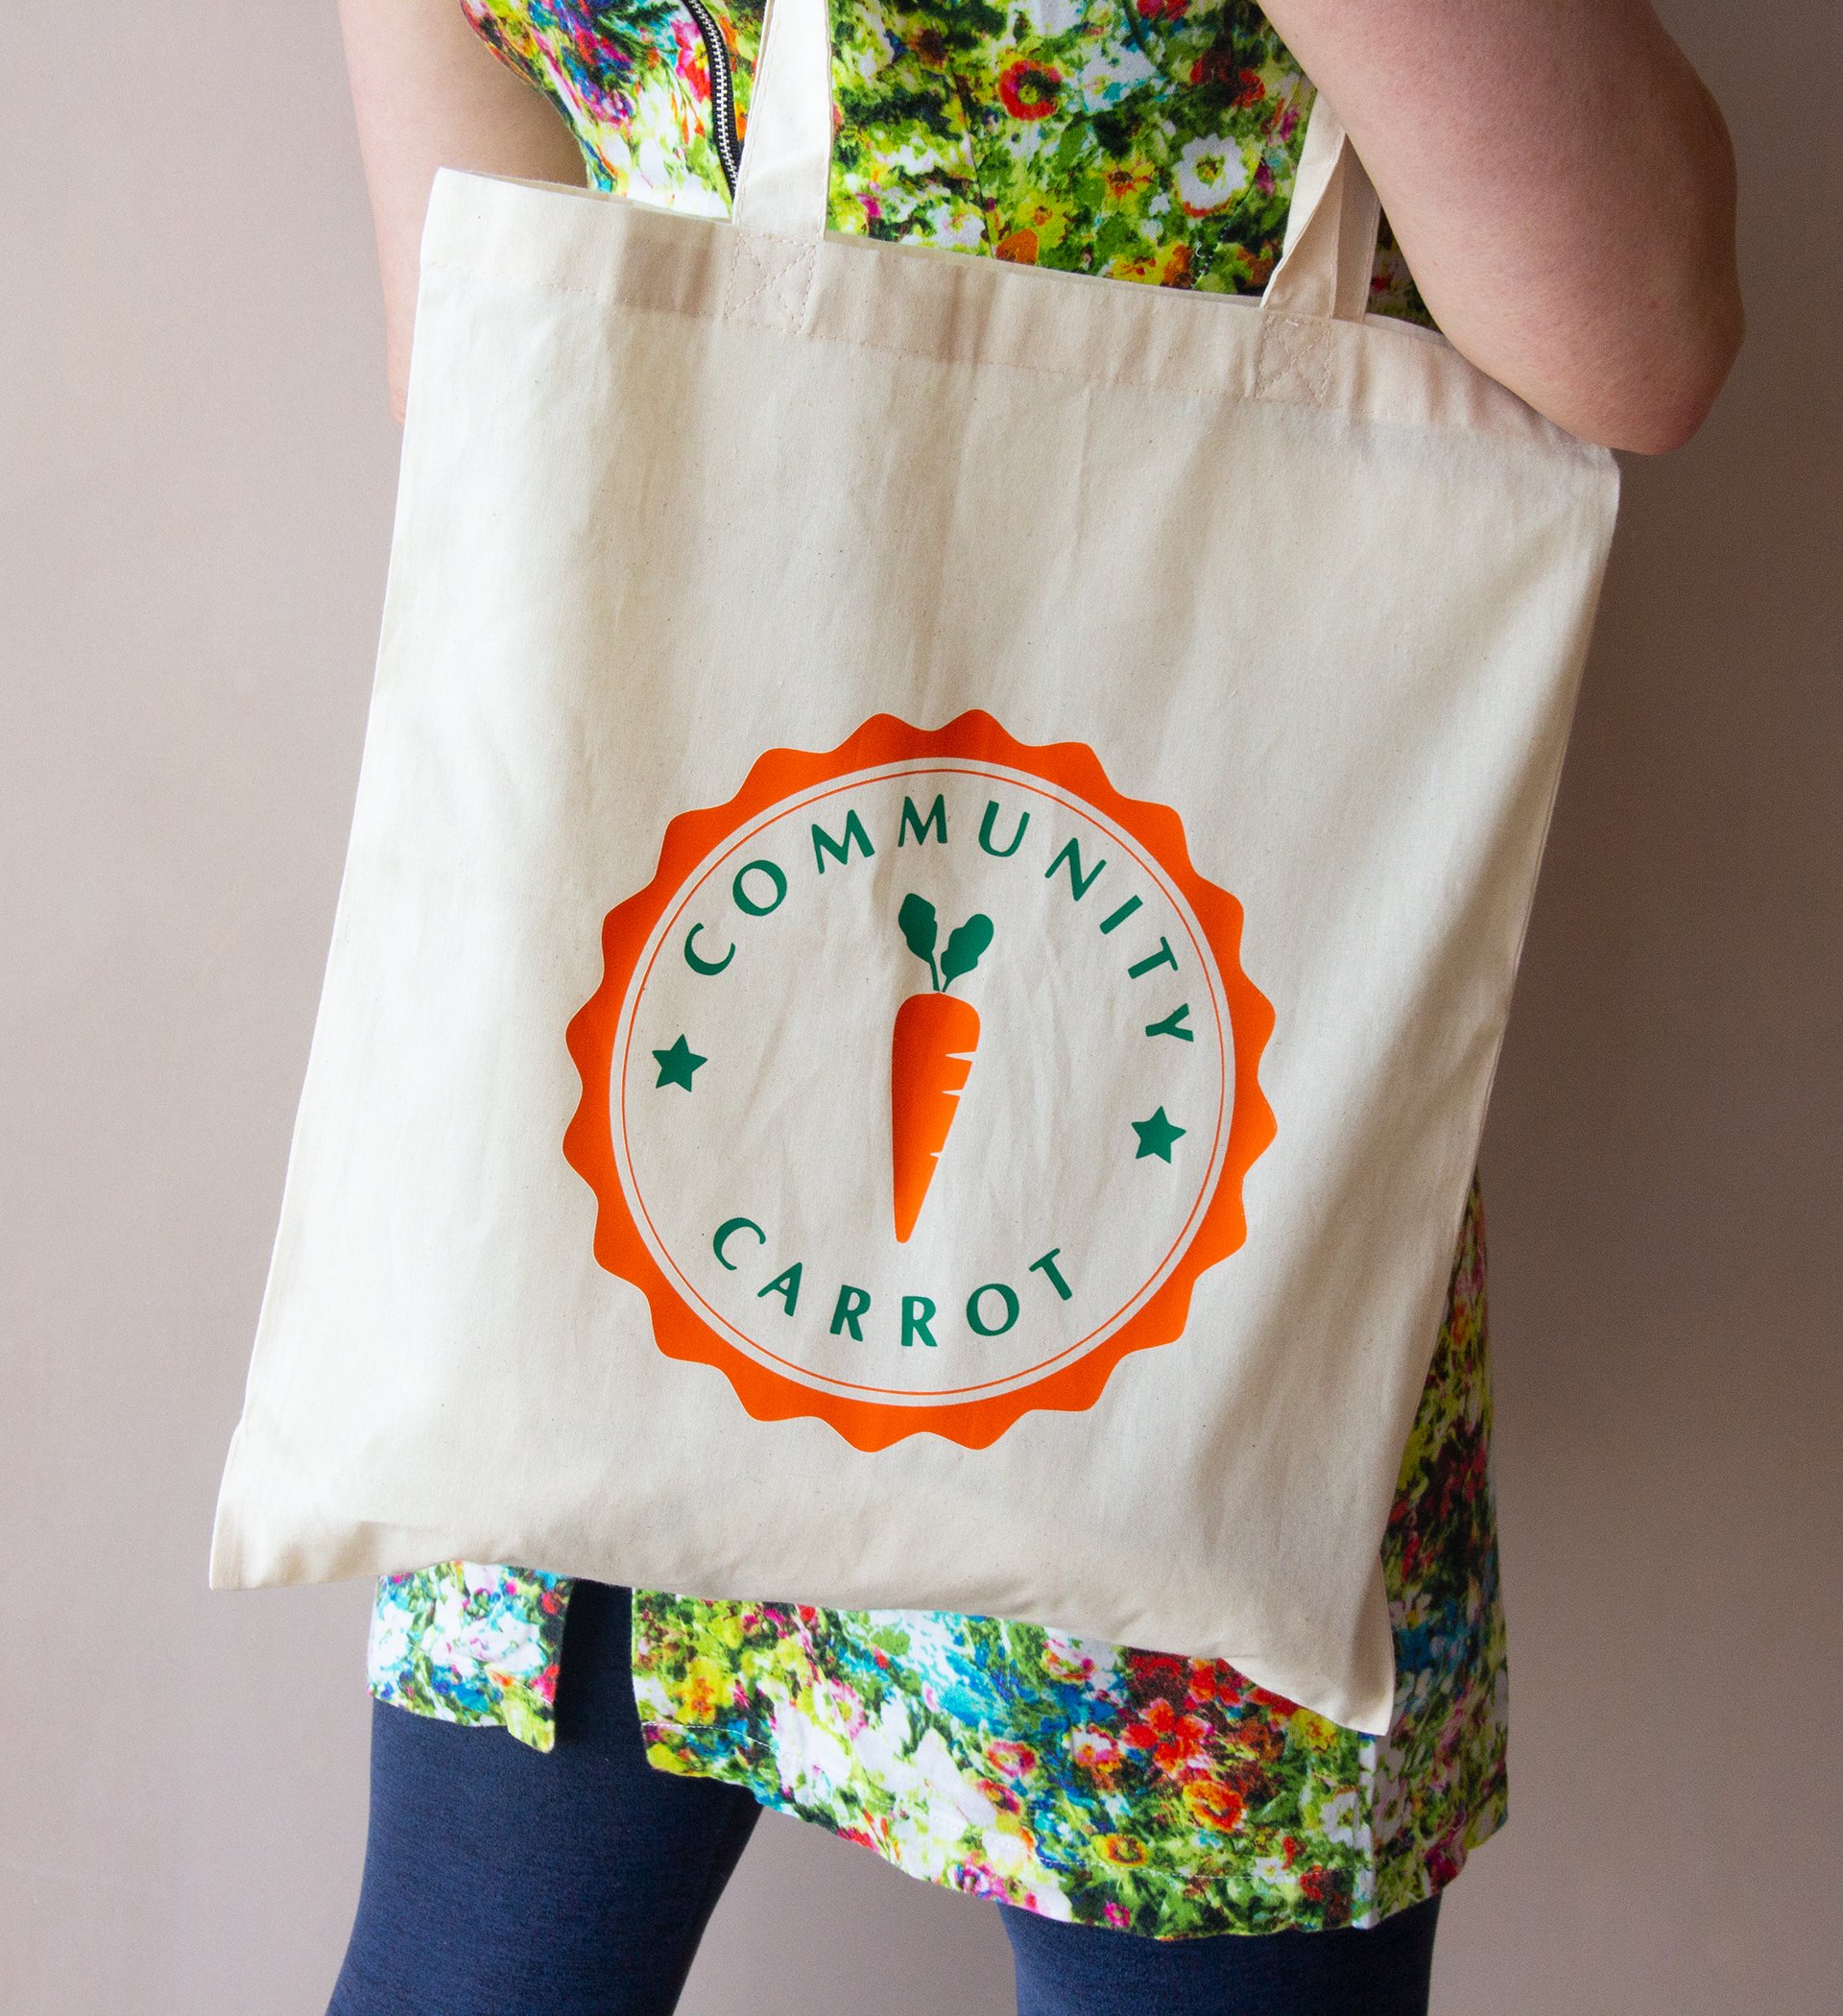 Woman in bright floral dress carrying a Community Carrot Linen Bag